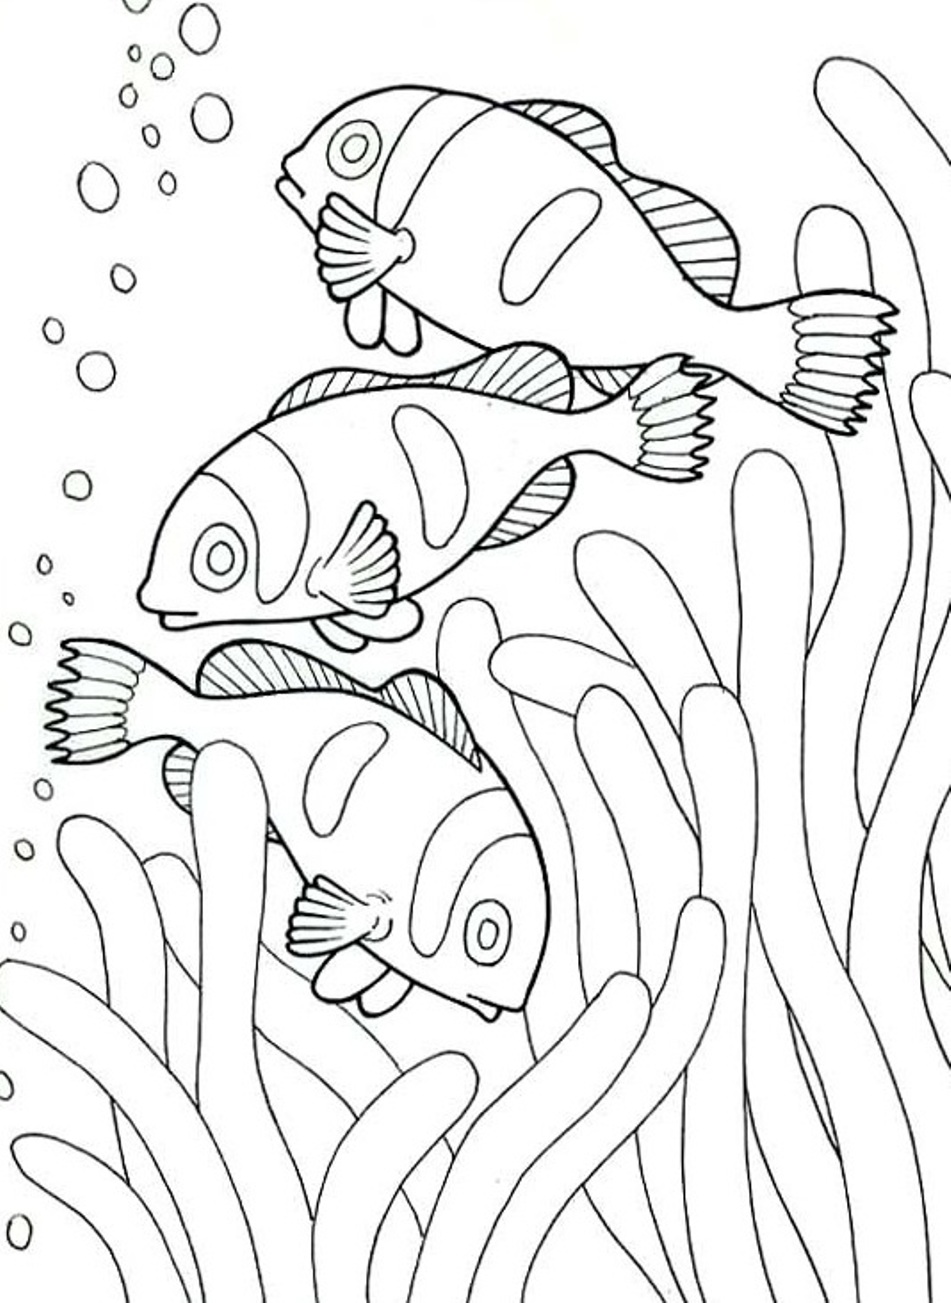 Coloring Pages Of Sea Animals Clown Fish53dd Coloring Page